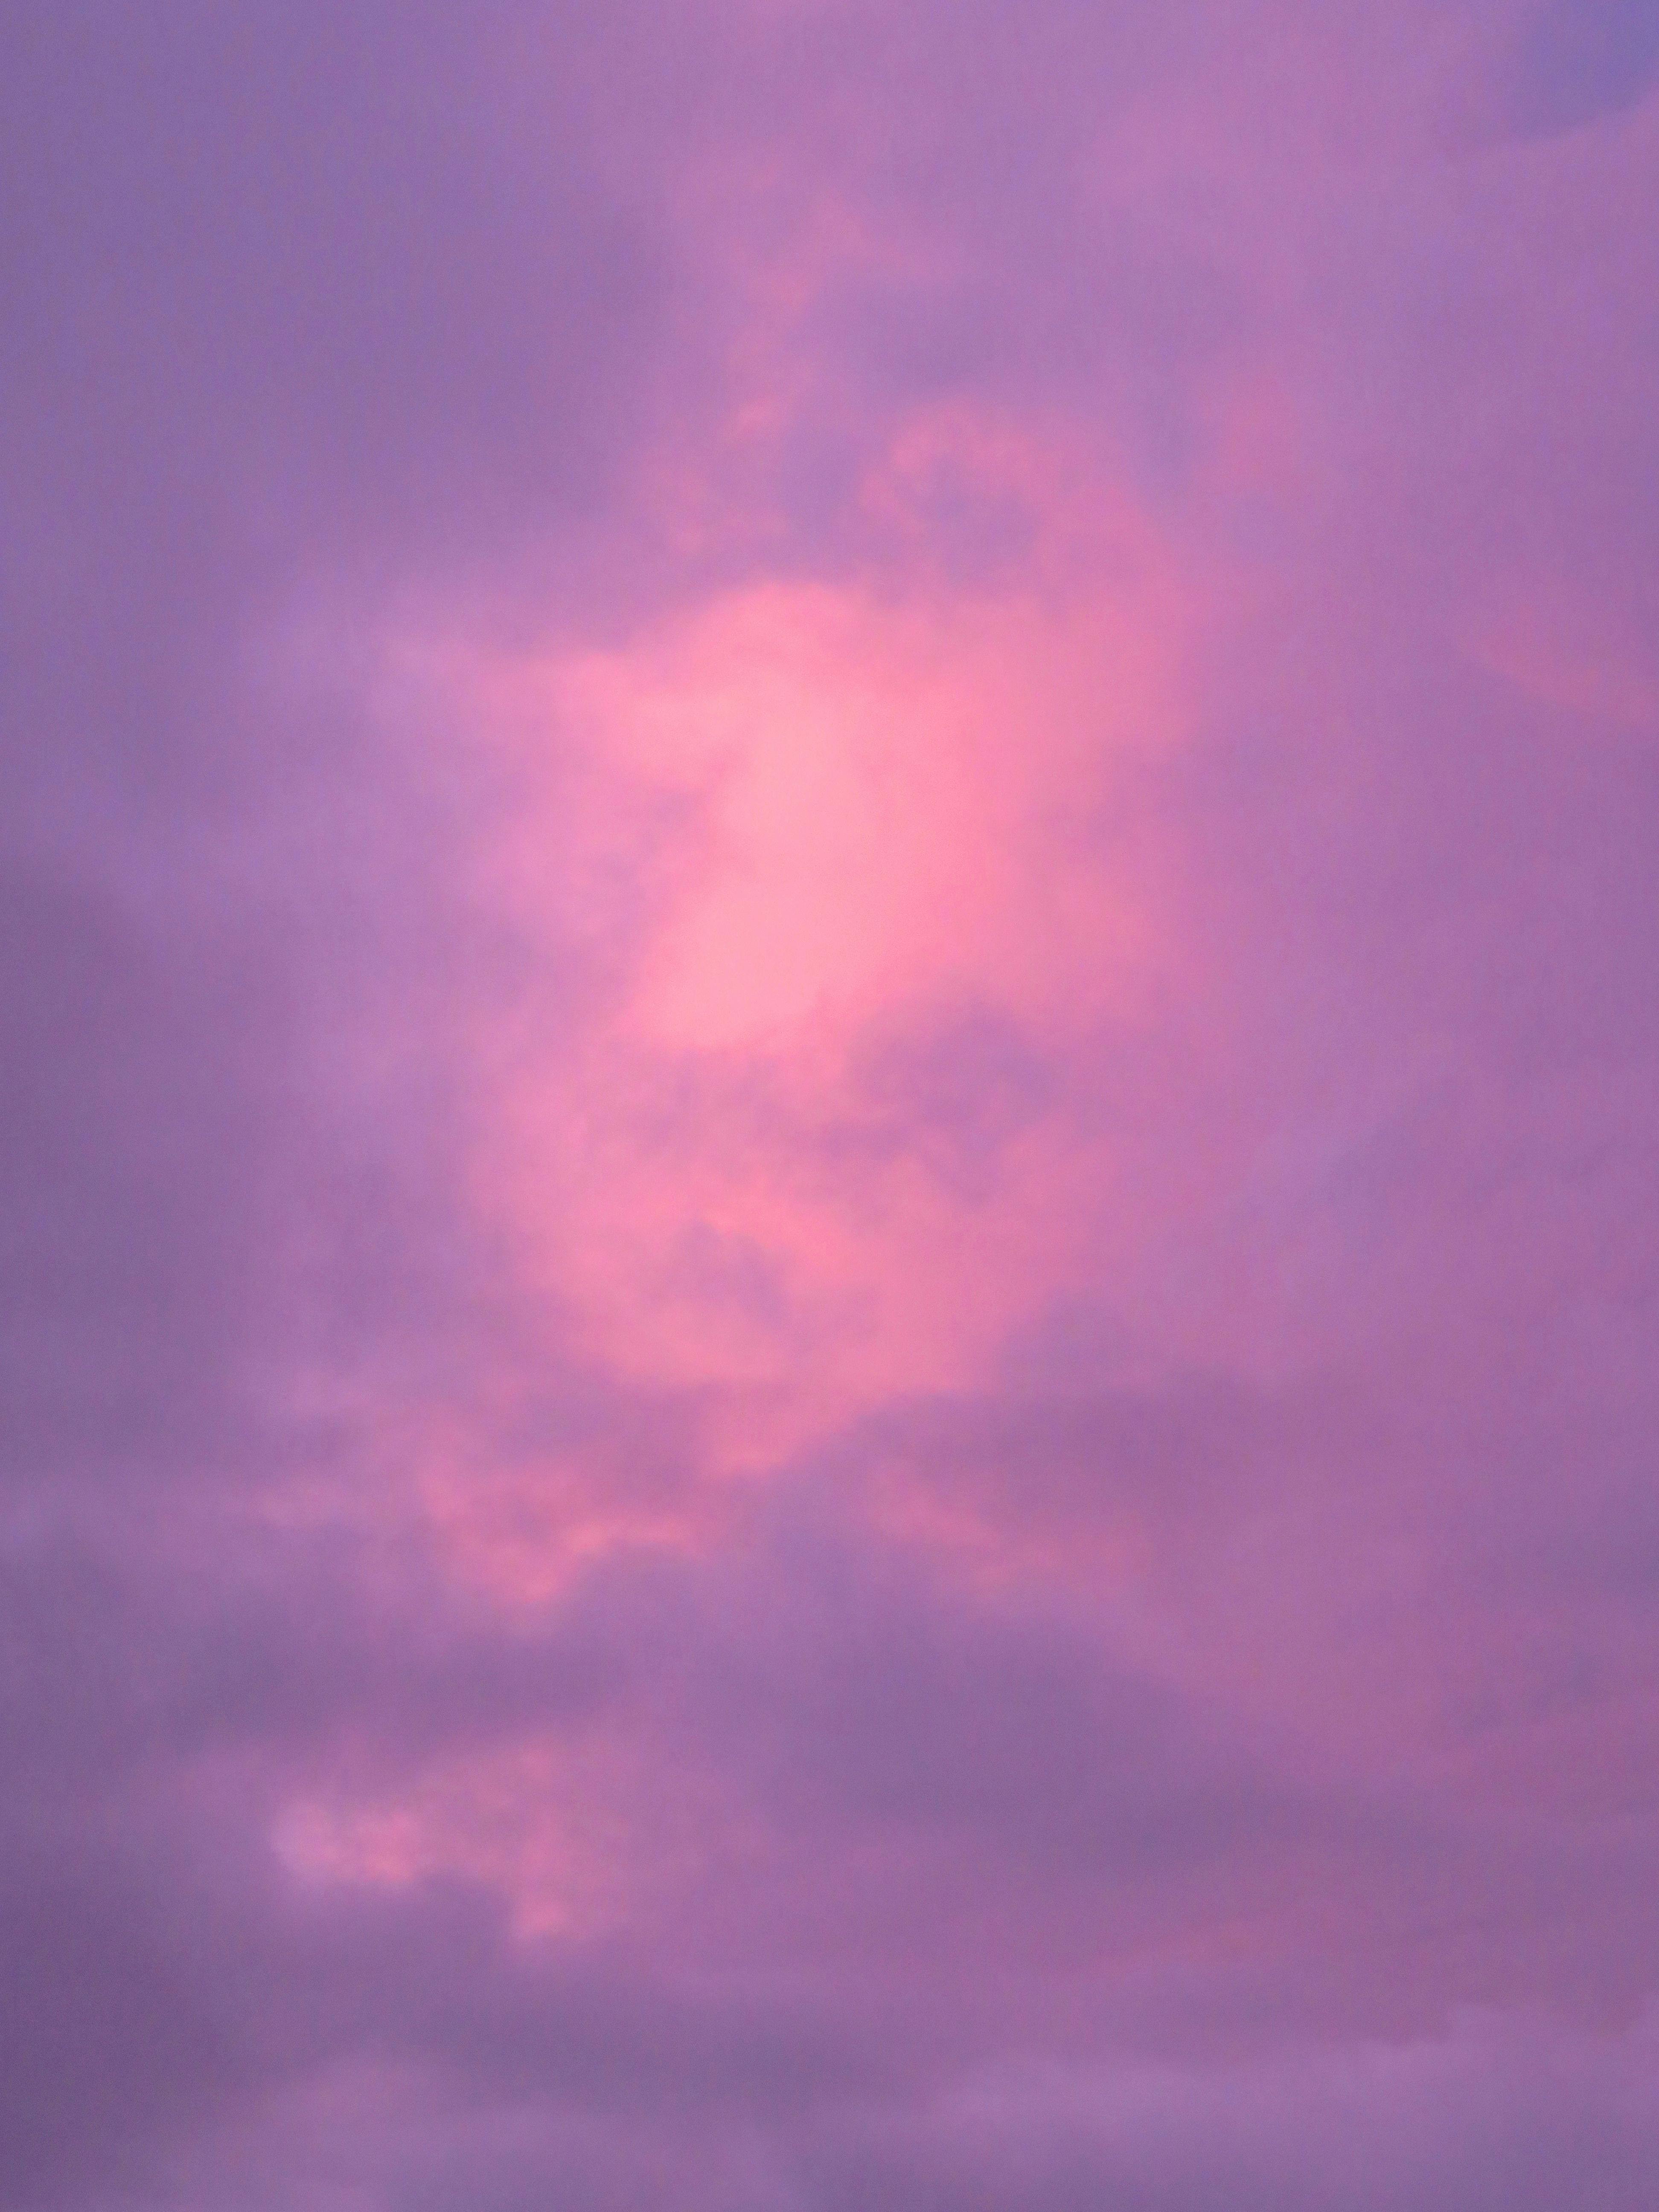 Free stock photo of Purple Clouds